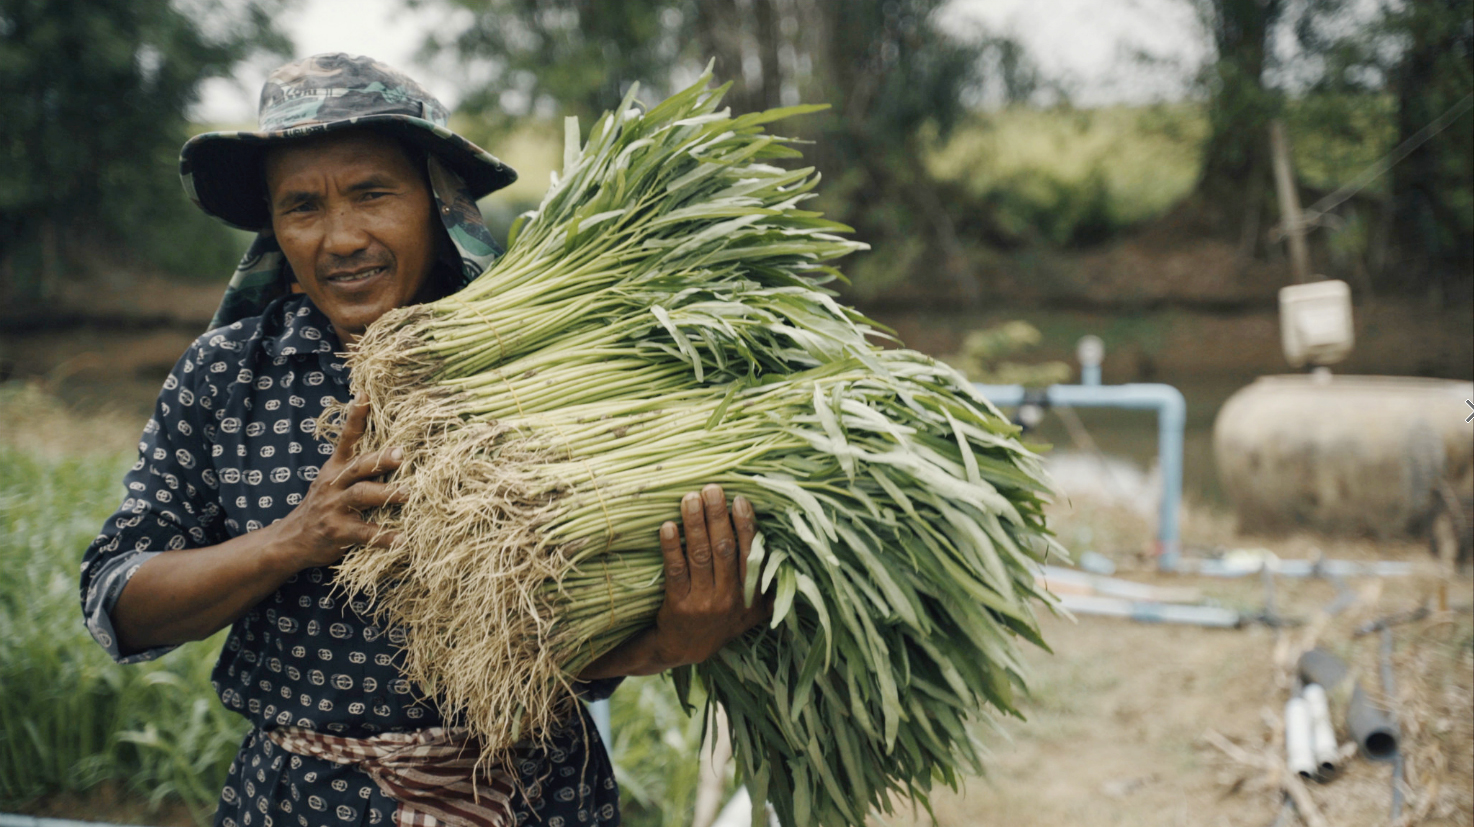 Farmer carrying bundles of freshly harvested vegetables from his field in Cambodia